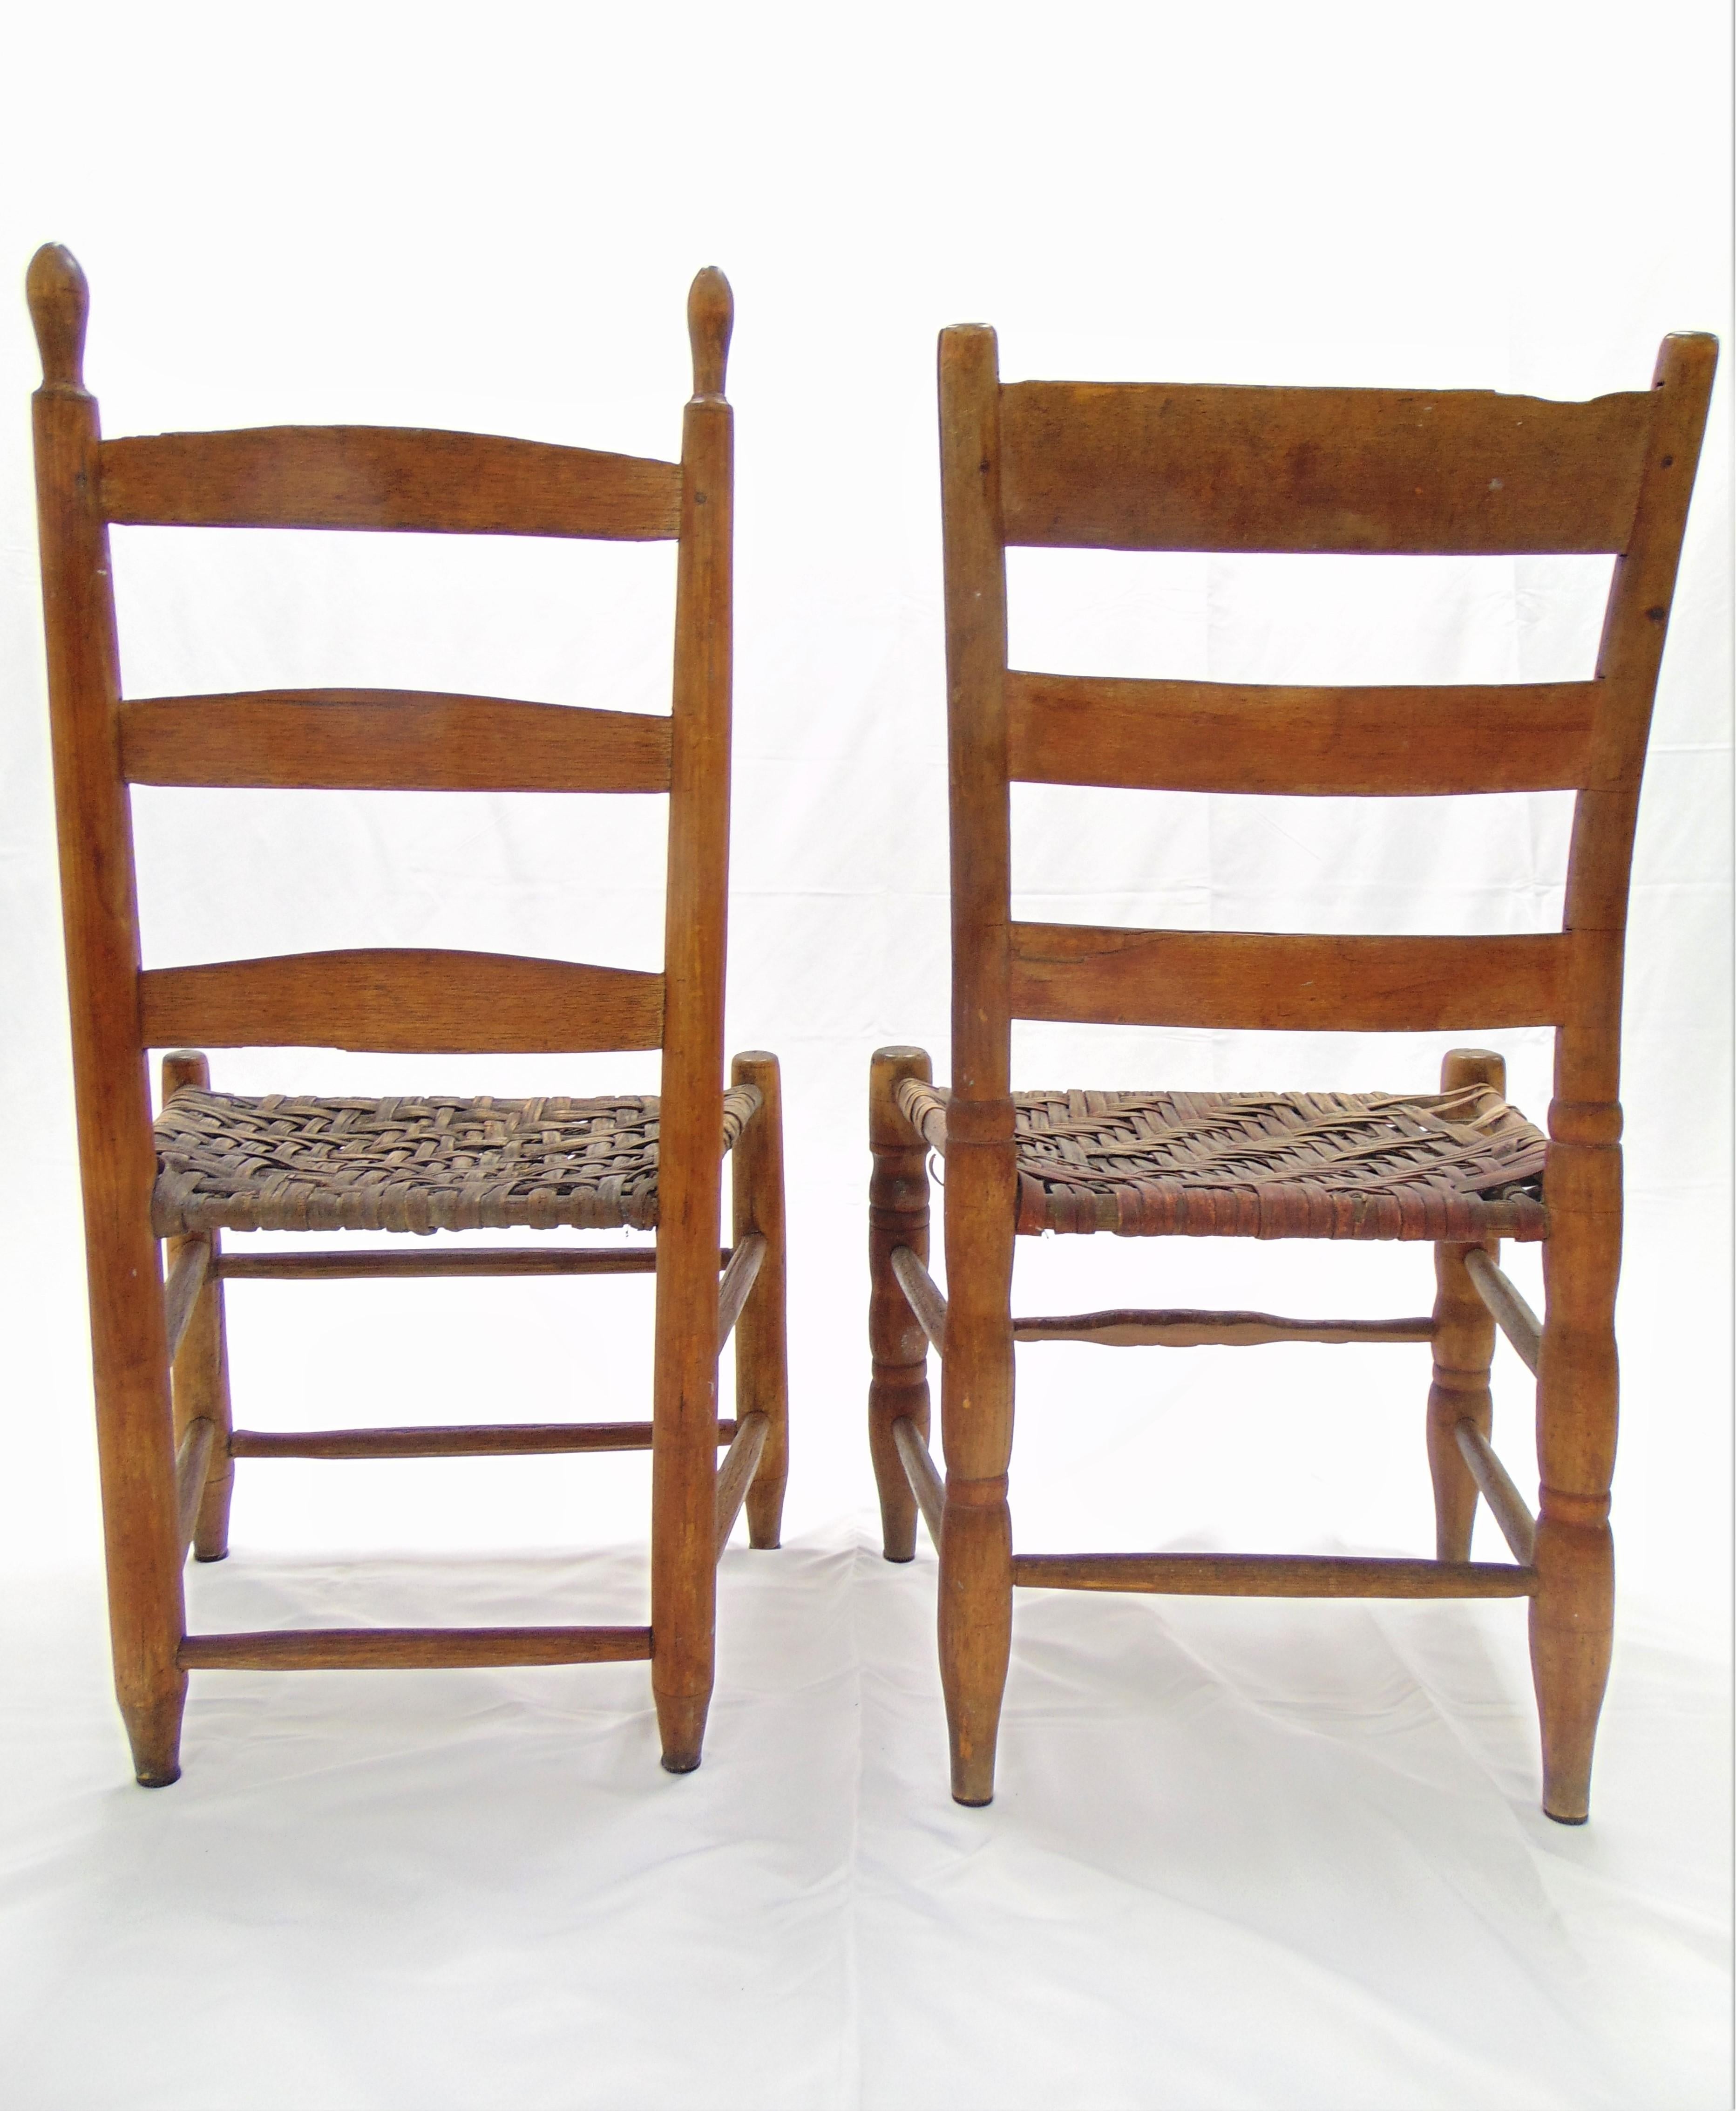 Pair of Antique Primitive Ladder Back and Splint Seats Early 19th Century For Sale 6